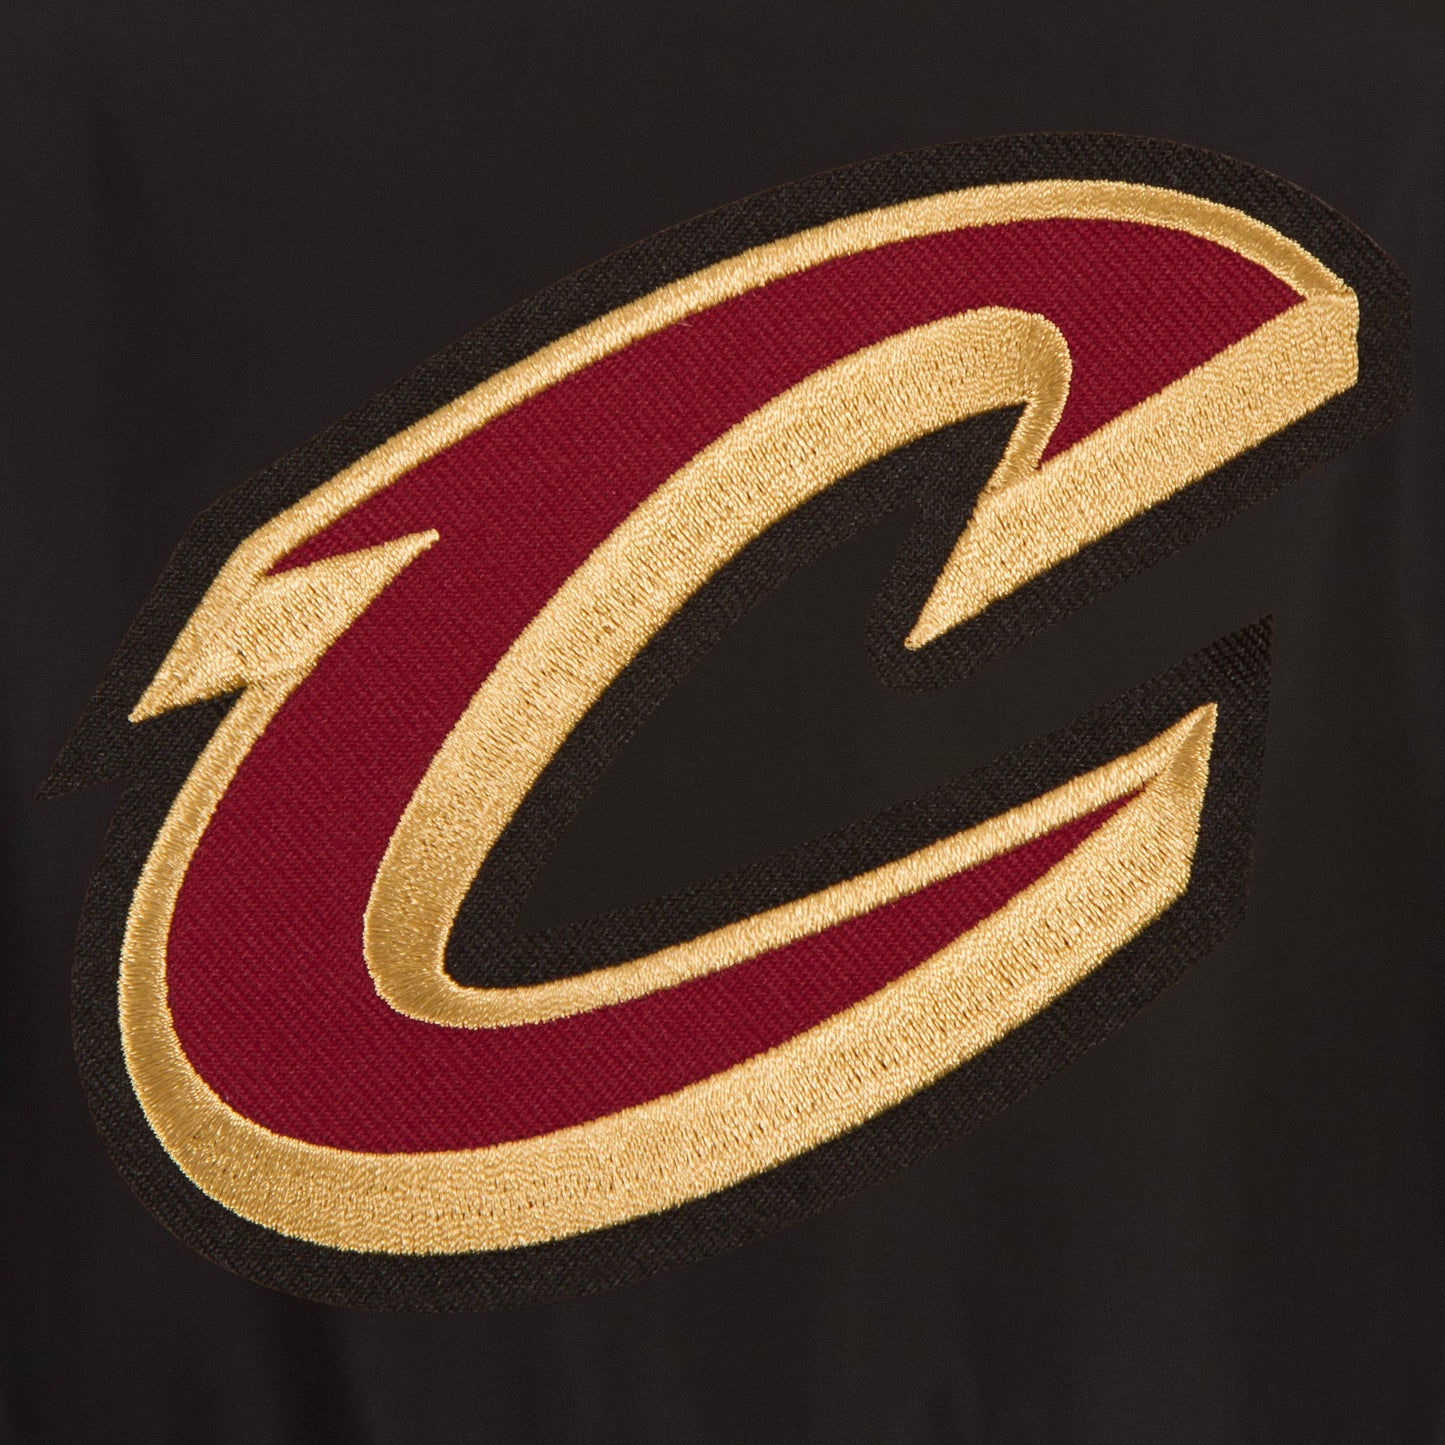 Cleveland Cavaliers All Wool Jacket